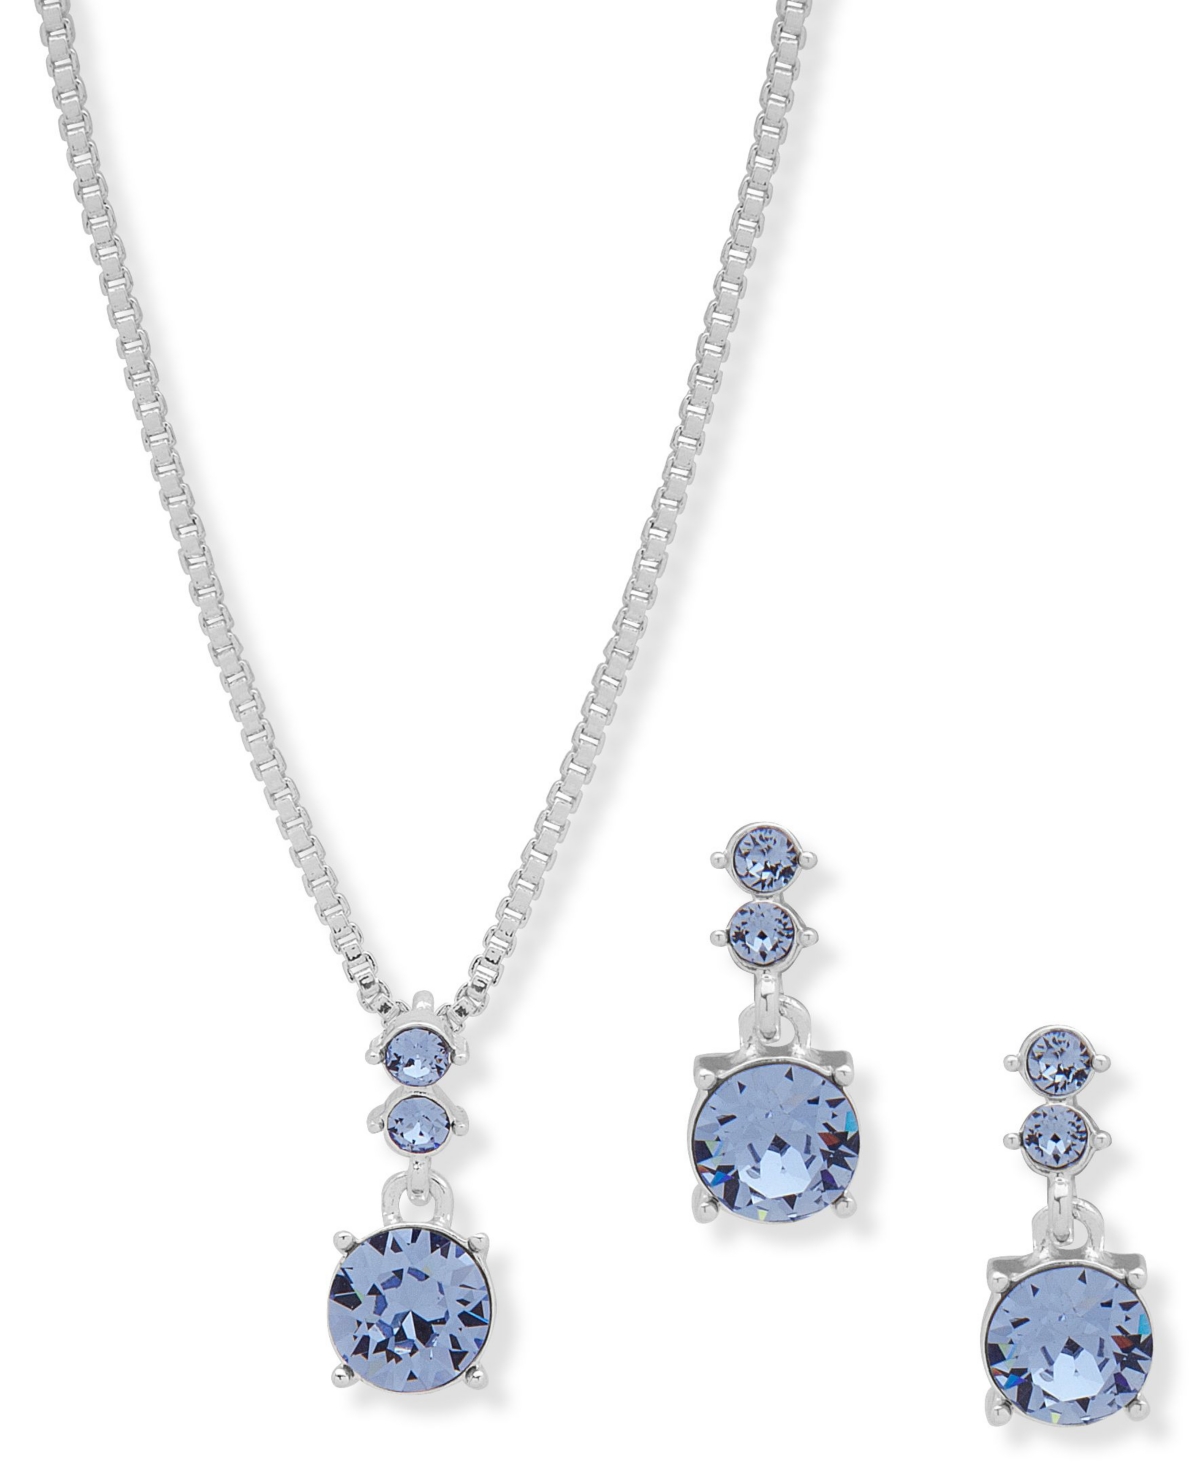 Boxed Necklace and Earring Set - Silver-tone